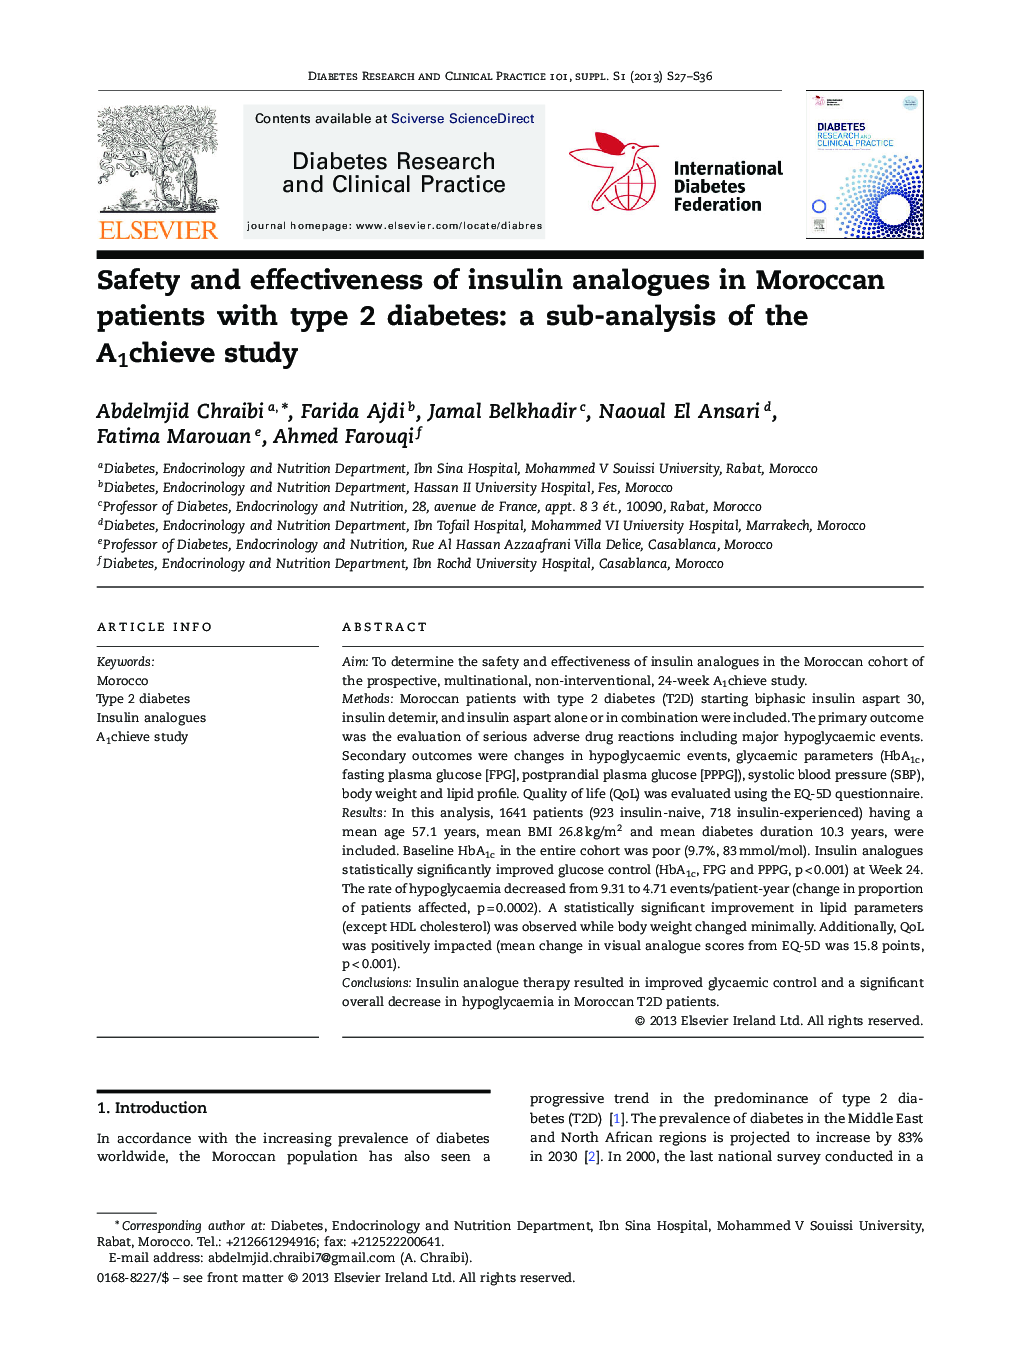 Safety and effectiveness of insulin analogues in Moroccan patients with type 2 diabetes: a sub-analysis of the A1chieve study